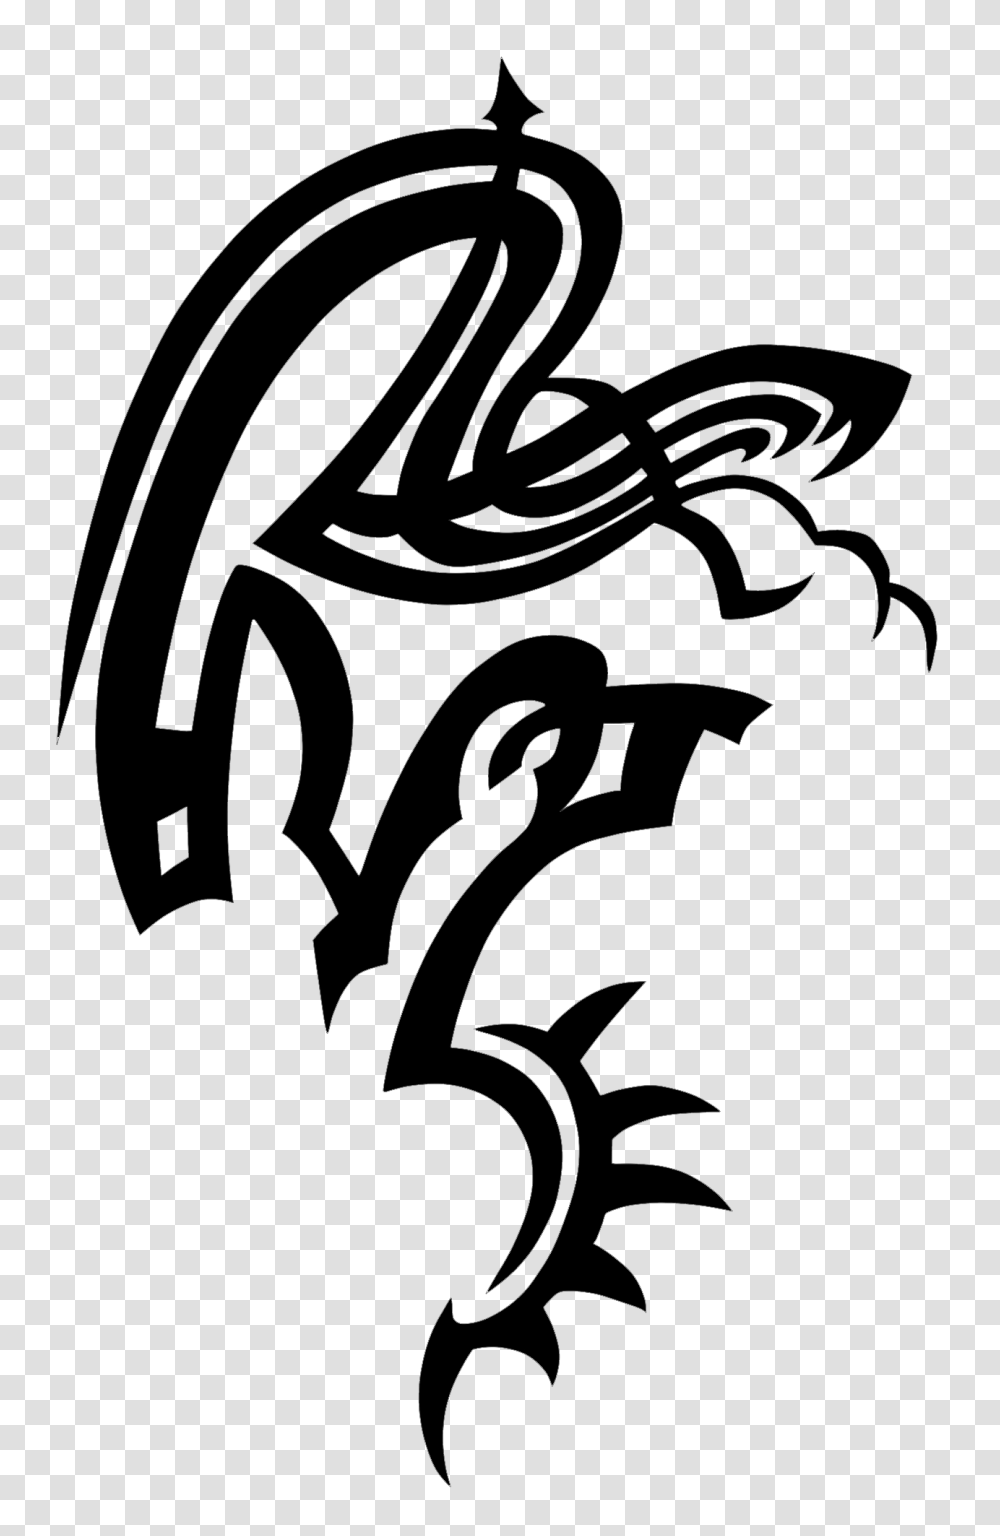 Snake Tattoo Snake Tattoo Images, Stencil Transparent Png